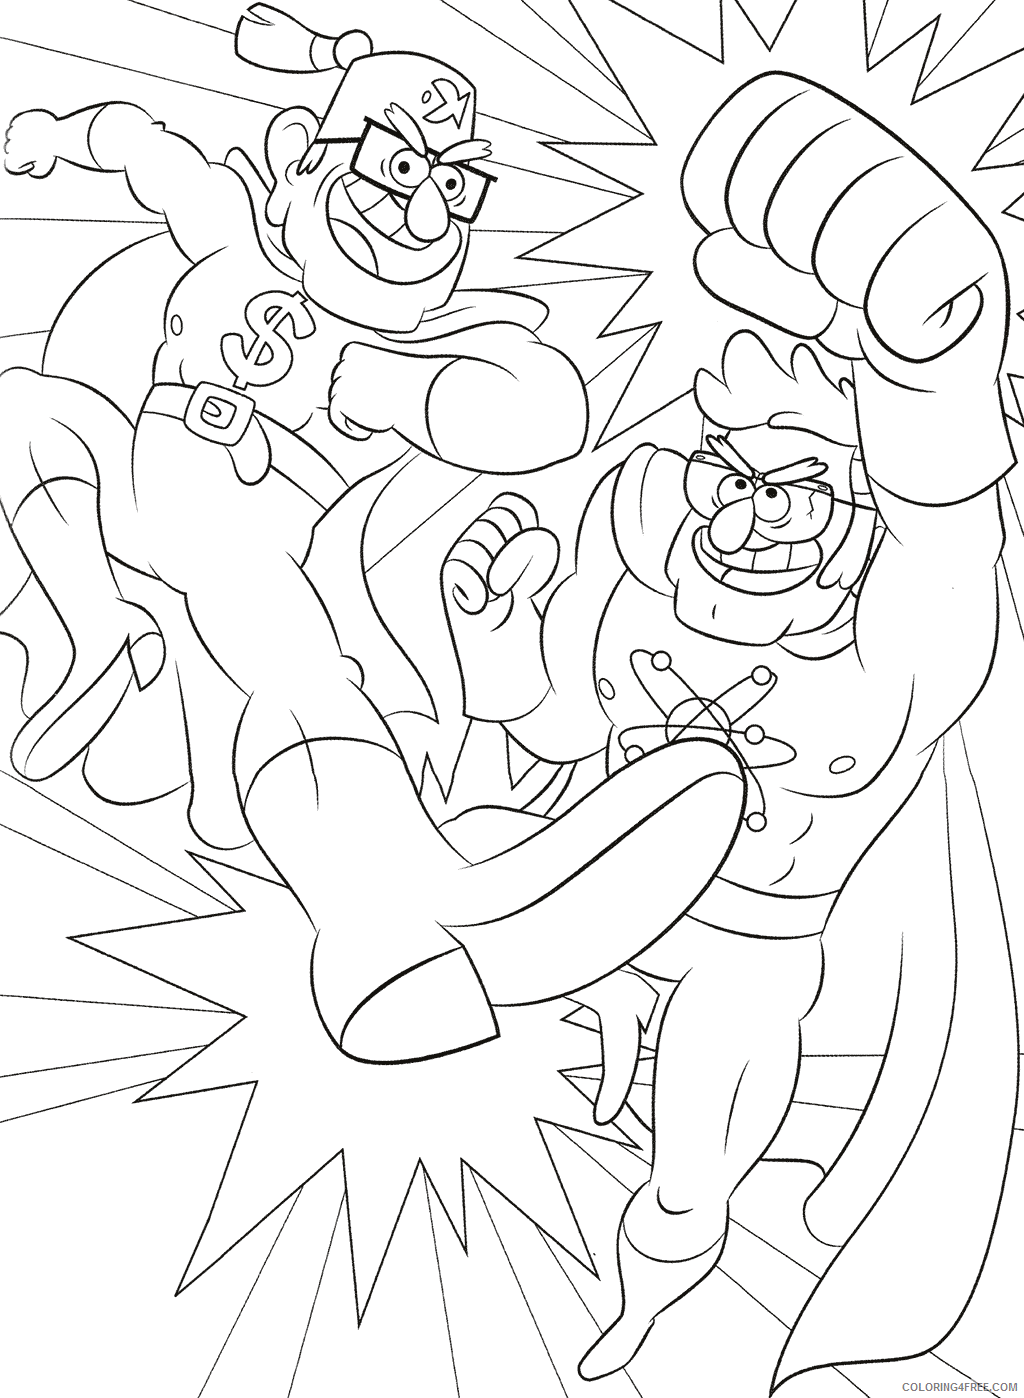 Gravity Falls Coloring Pages TV Film Action Printable 2020 03342 Coloring4free